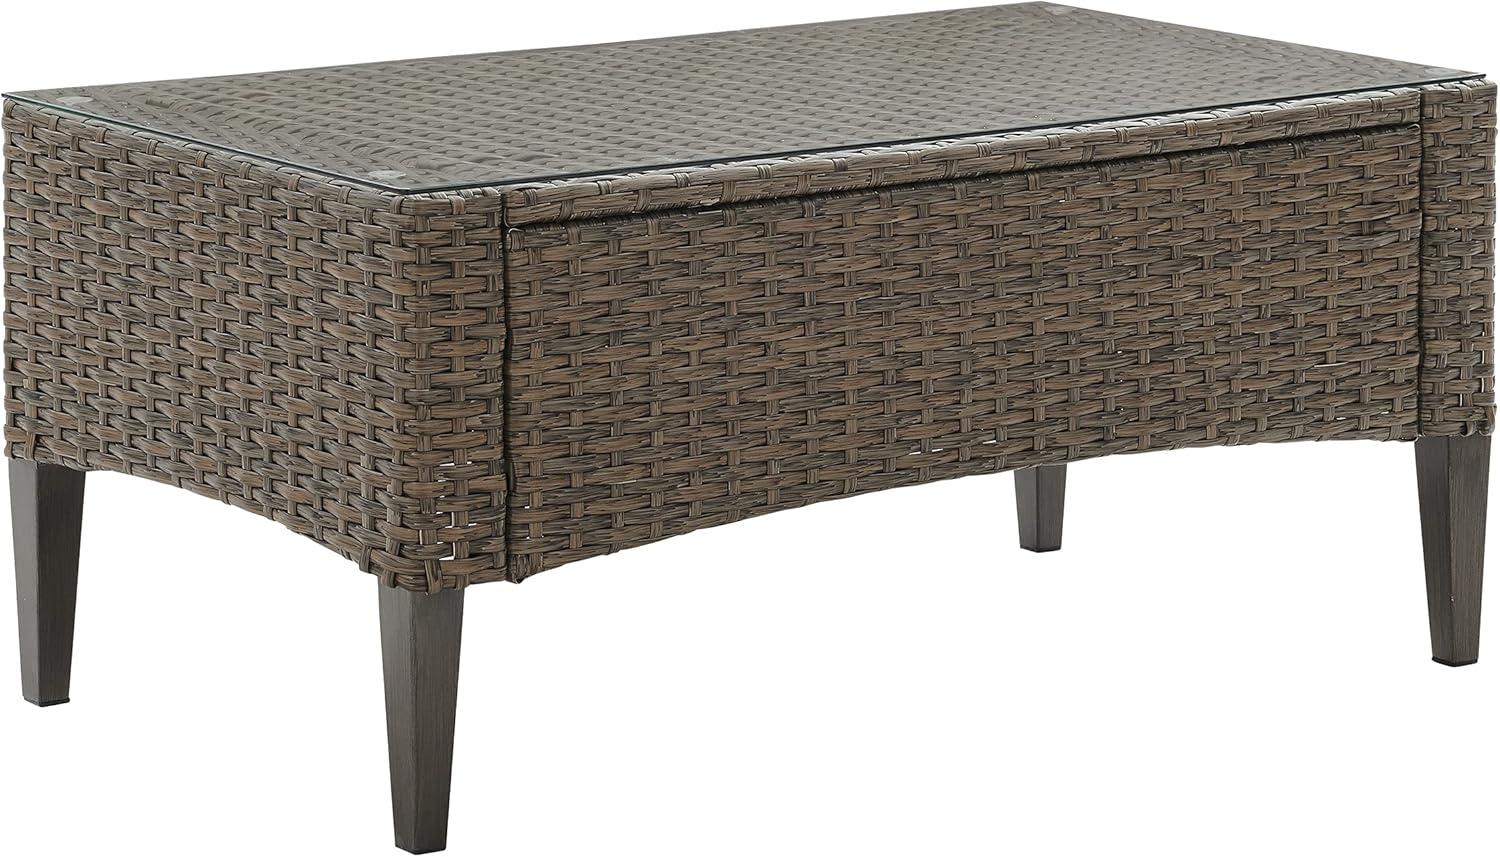 Rockport Light Brown Outdoor Wicker Coffee Table with Tempered Glass